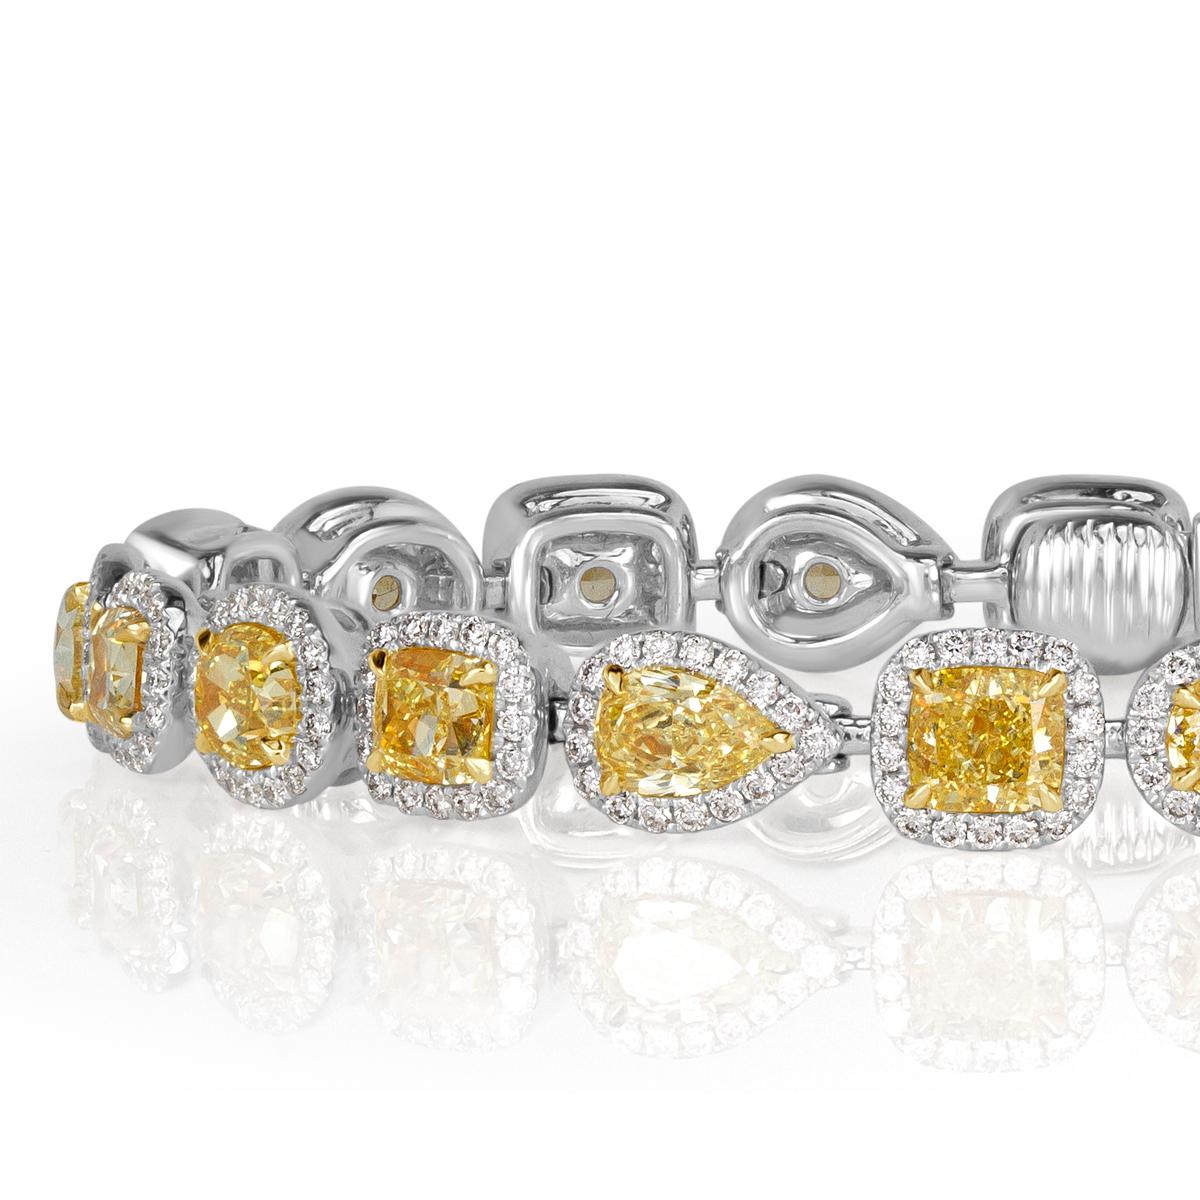 Gorgeous from every angle, this stunning diamond bracelet features larger fancy yellow diamonds of various shapes including round, cushion, oval and pear shaped diamonds. They are each accented by a halo of smaller white round brilliant cut